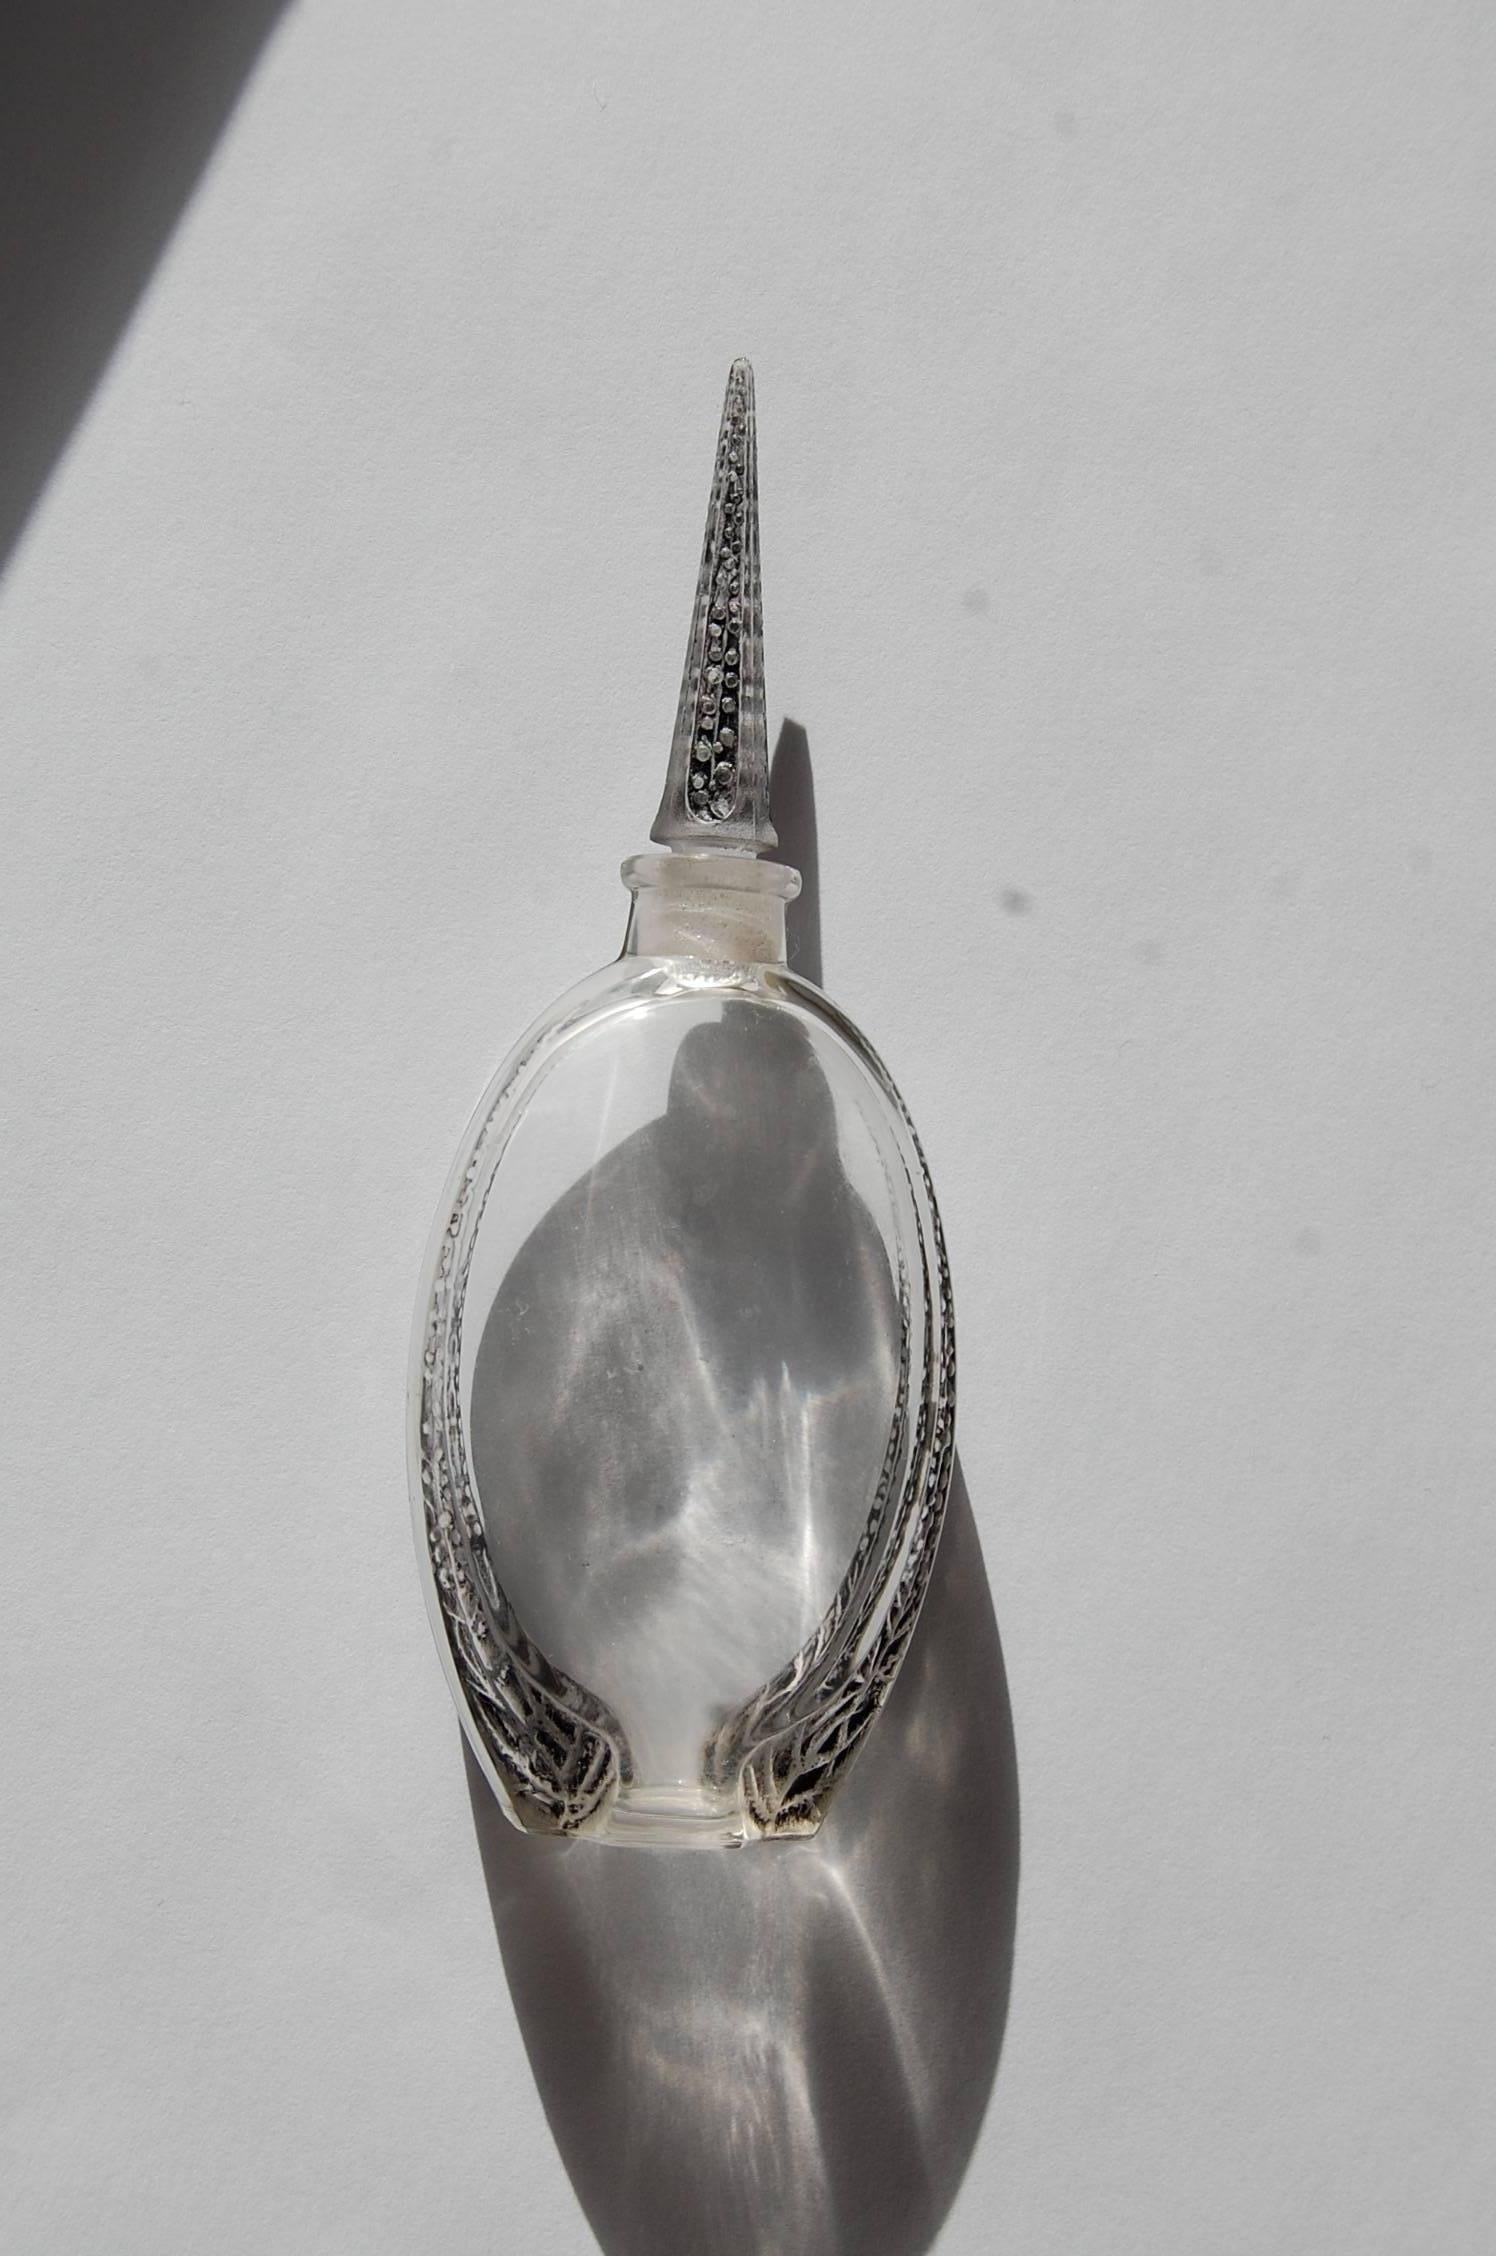 This complete perfume bottle for Lubin was designed by Rene Lalique (1860-1945) for the Christmas sales of 1920. It was one of the first monumental designs Lalique made in glass. The bottle is in very good original condition with grey staining. The